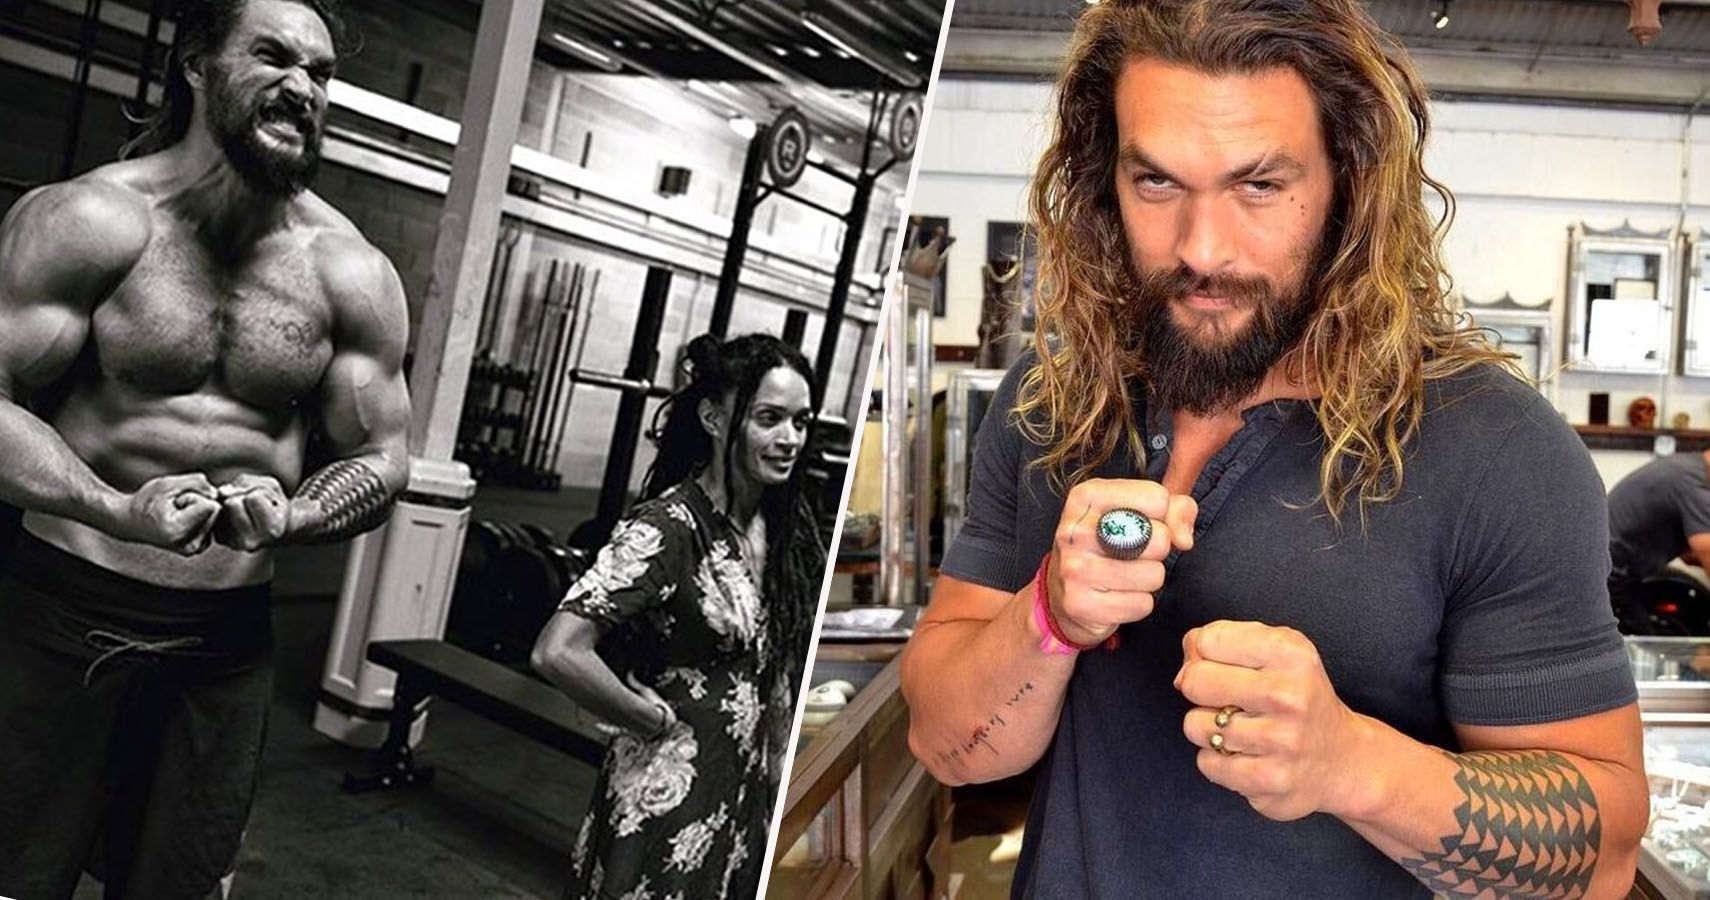 15 Pics Of Jason Momoa Thatll Make You Want To Hit The Gym 4817